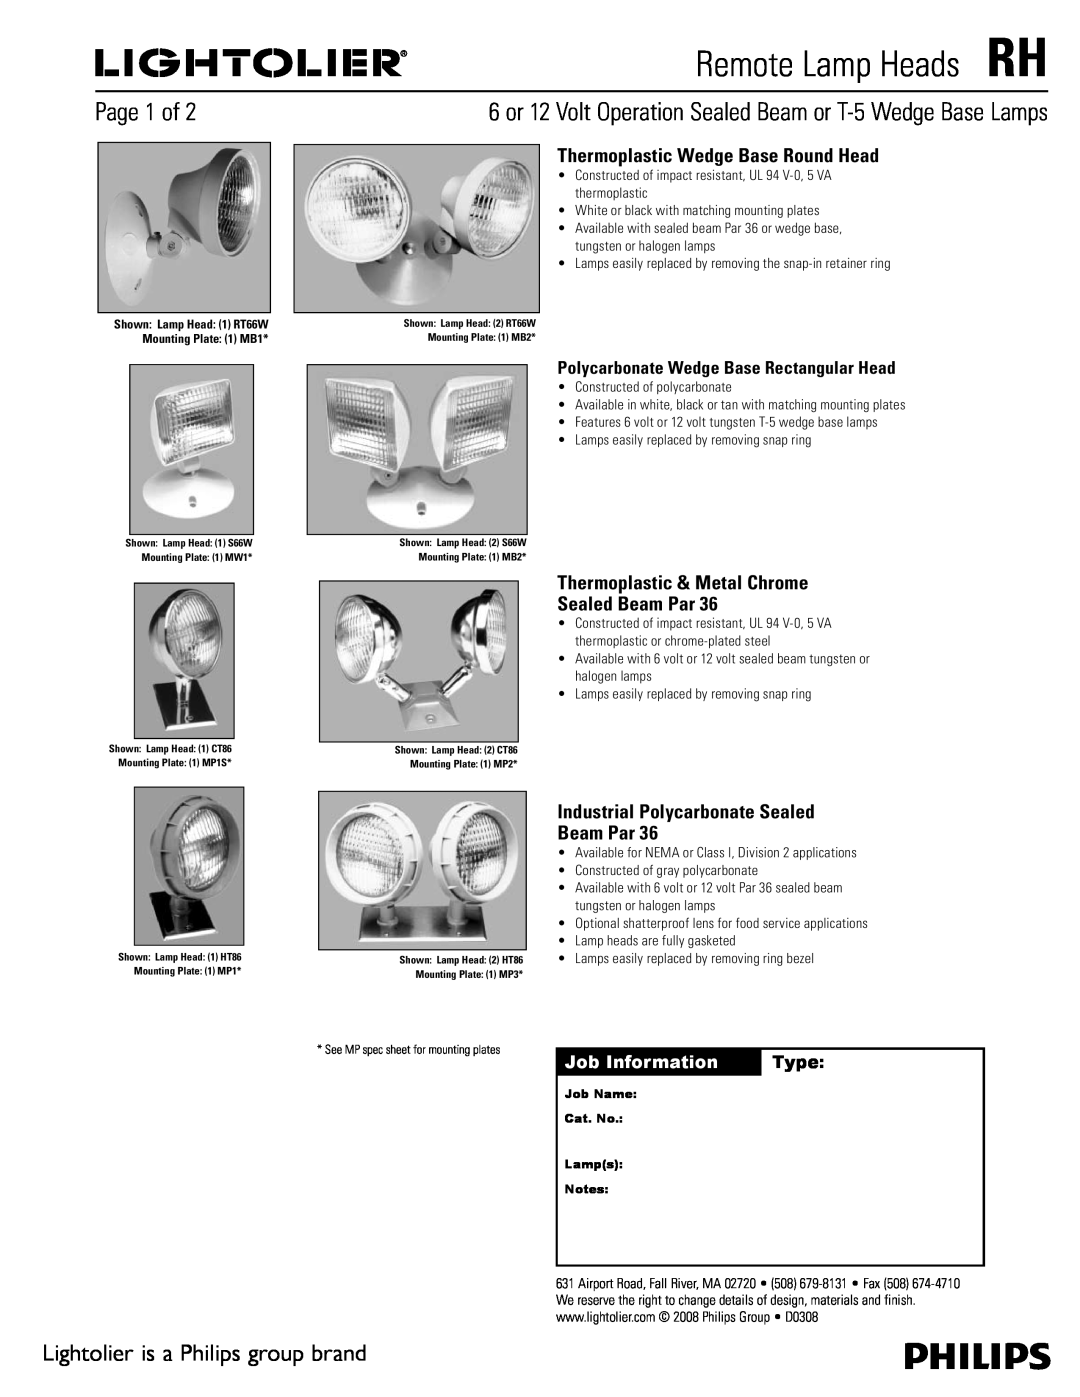 Lightolier RH manual Page 1 of, Lightolier is a Philips group brand, Thermoplastic Wedge Base Round Head, Job Information 